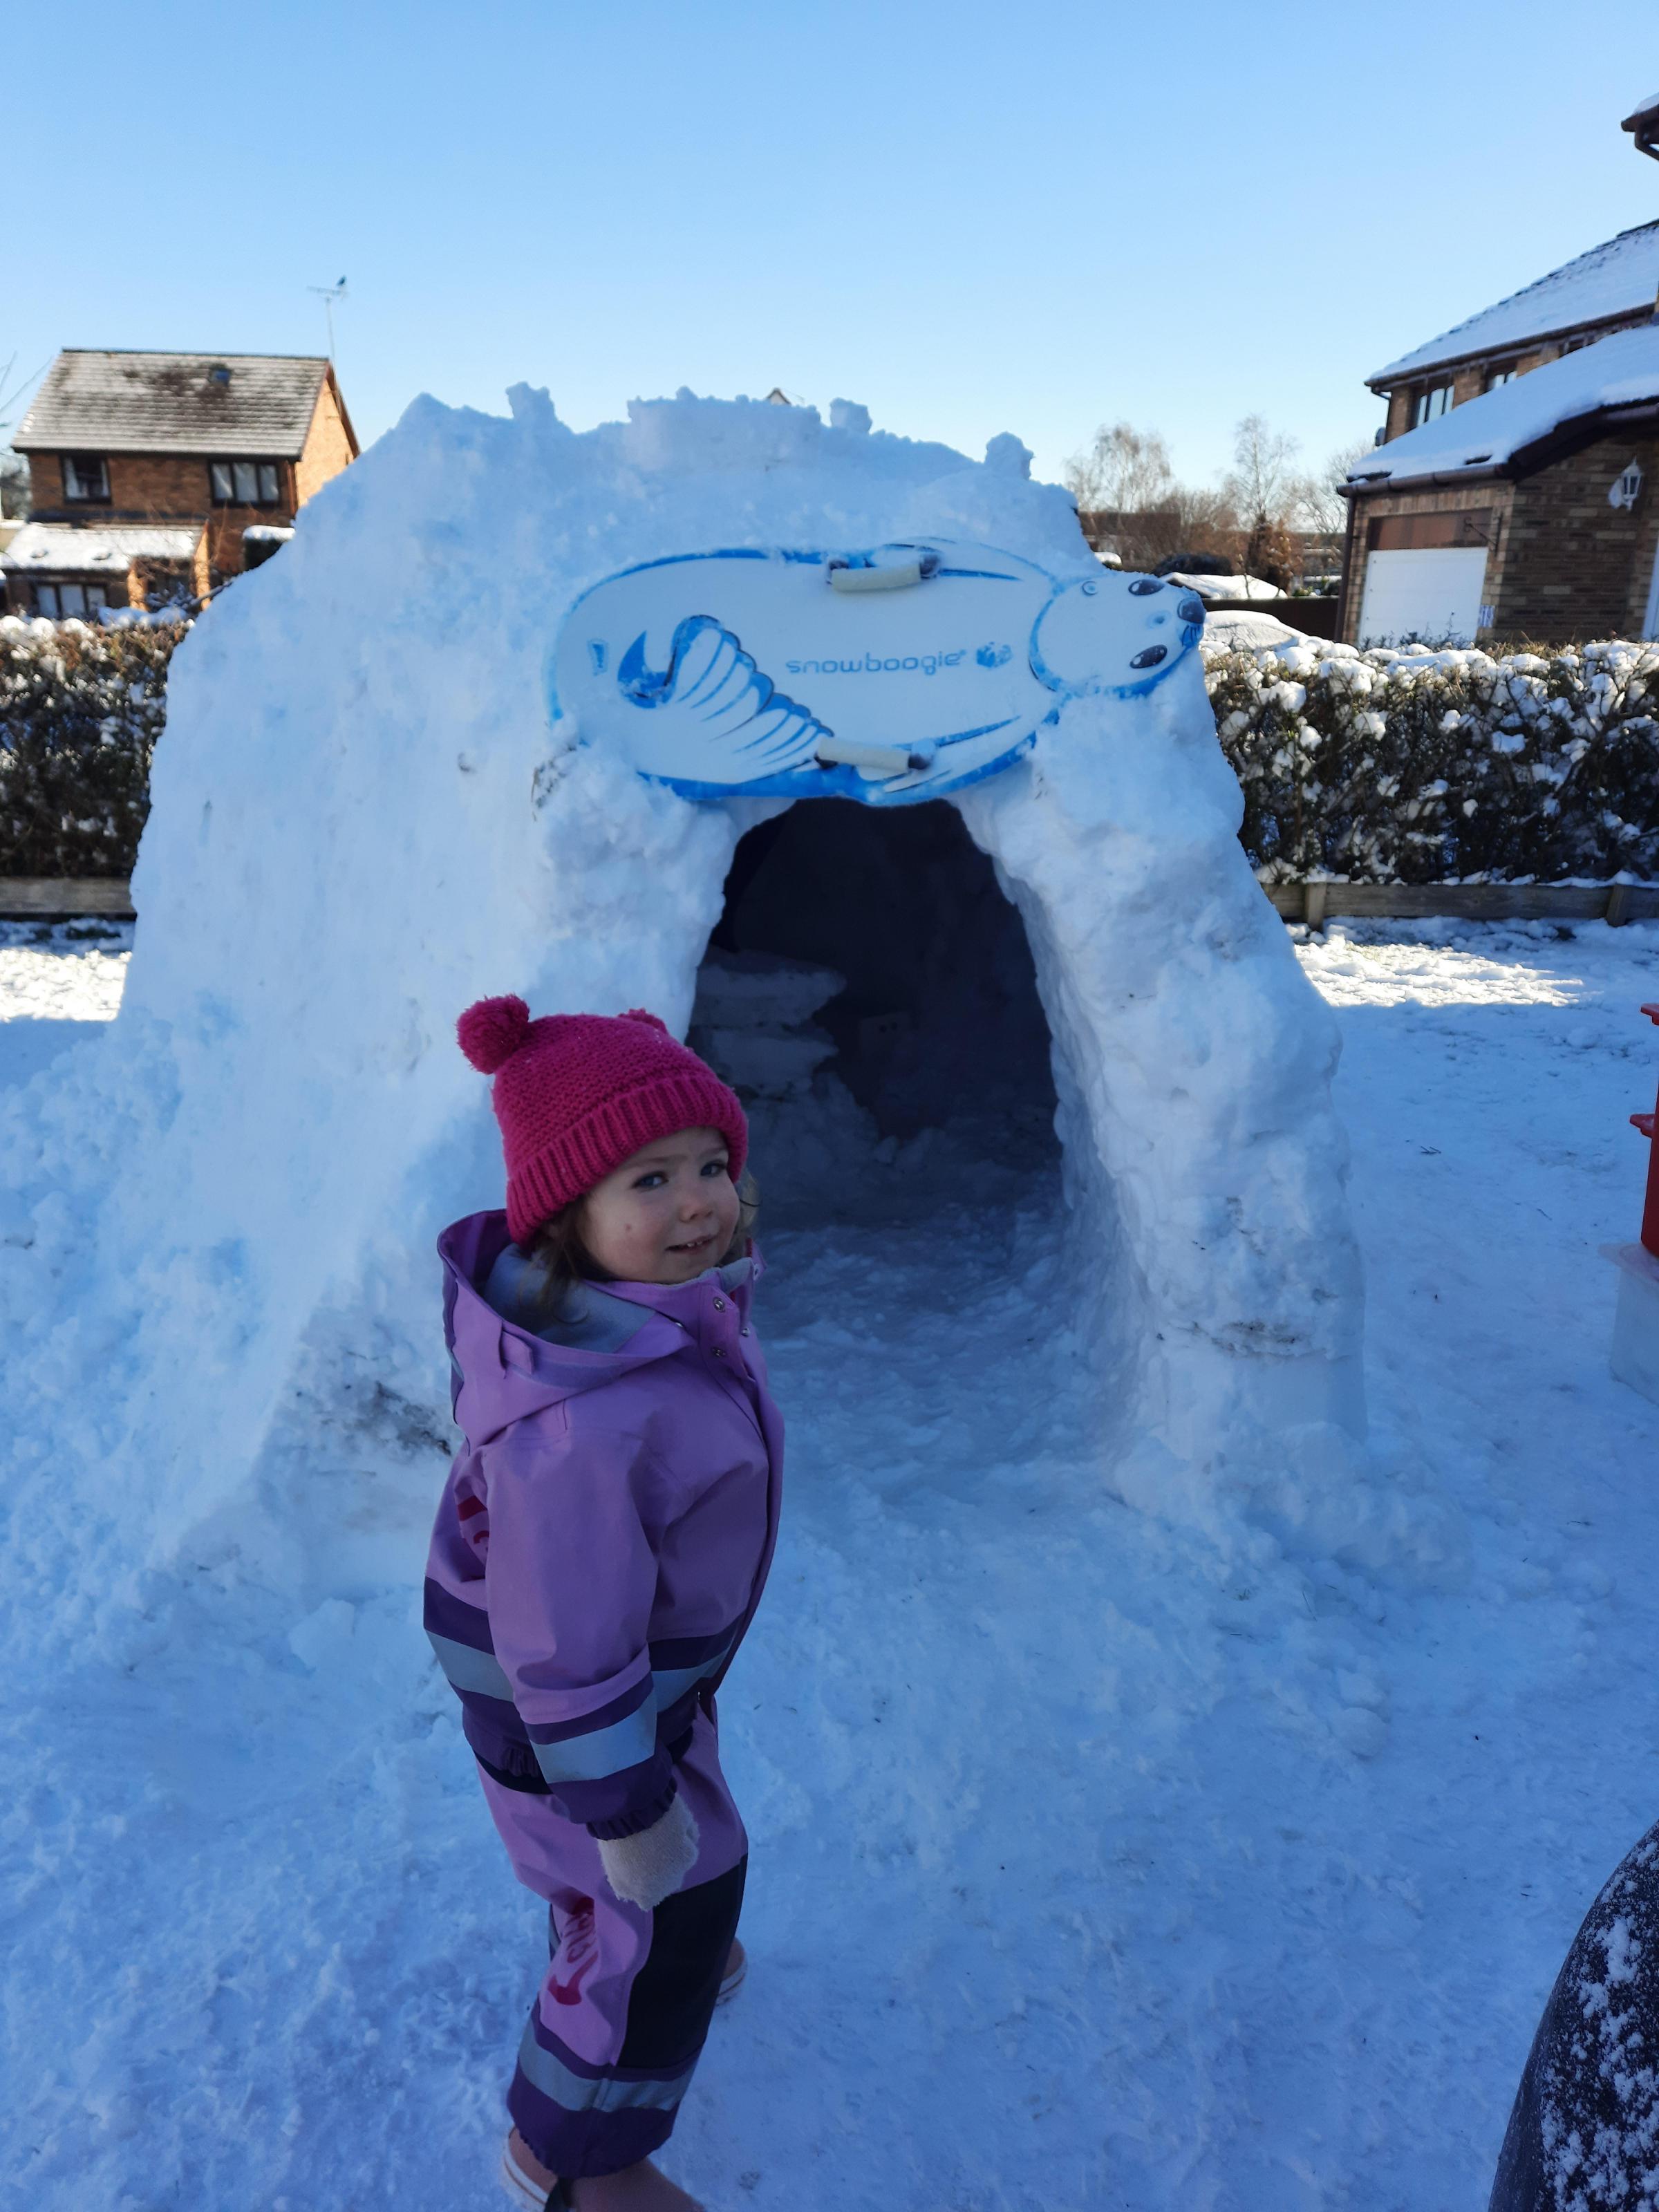 Three residents in Musselburgh have built this igloo, or as they are calling it an ice man cave